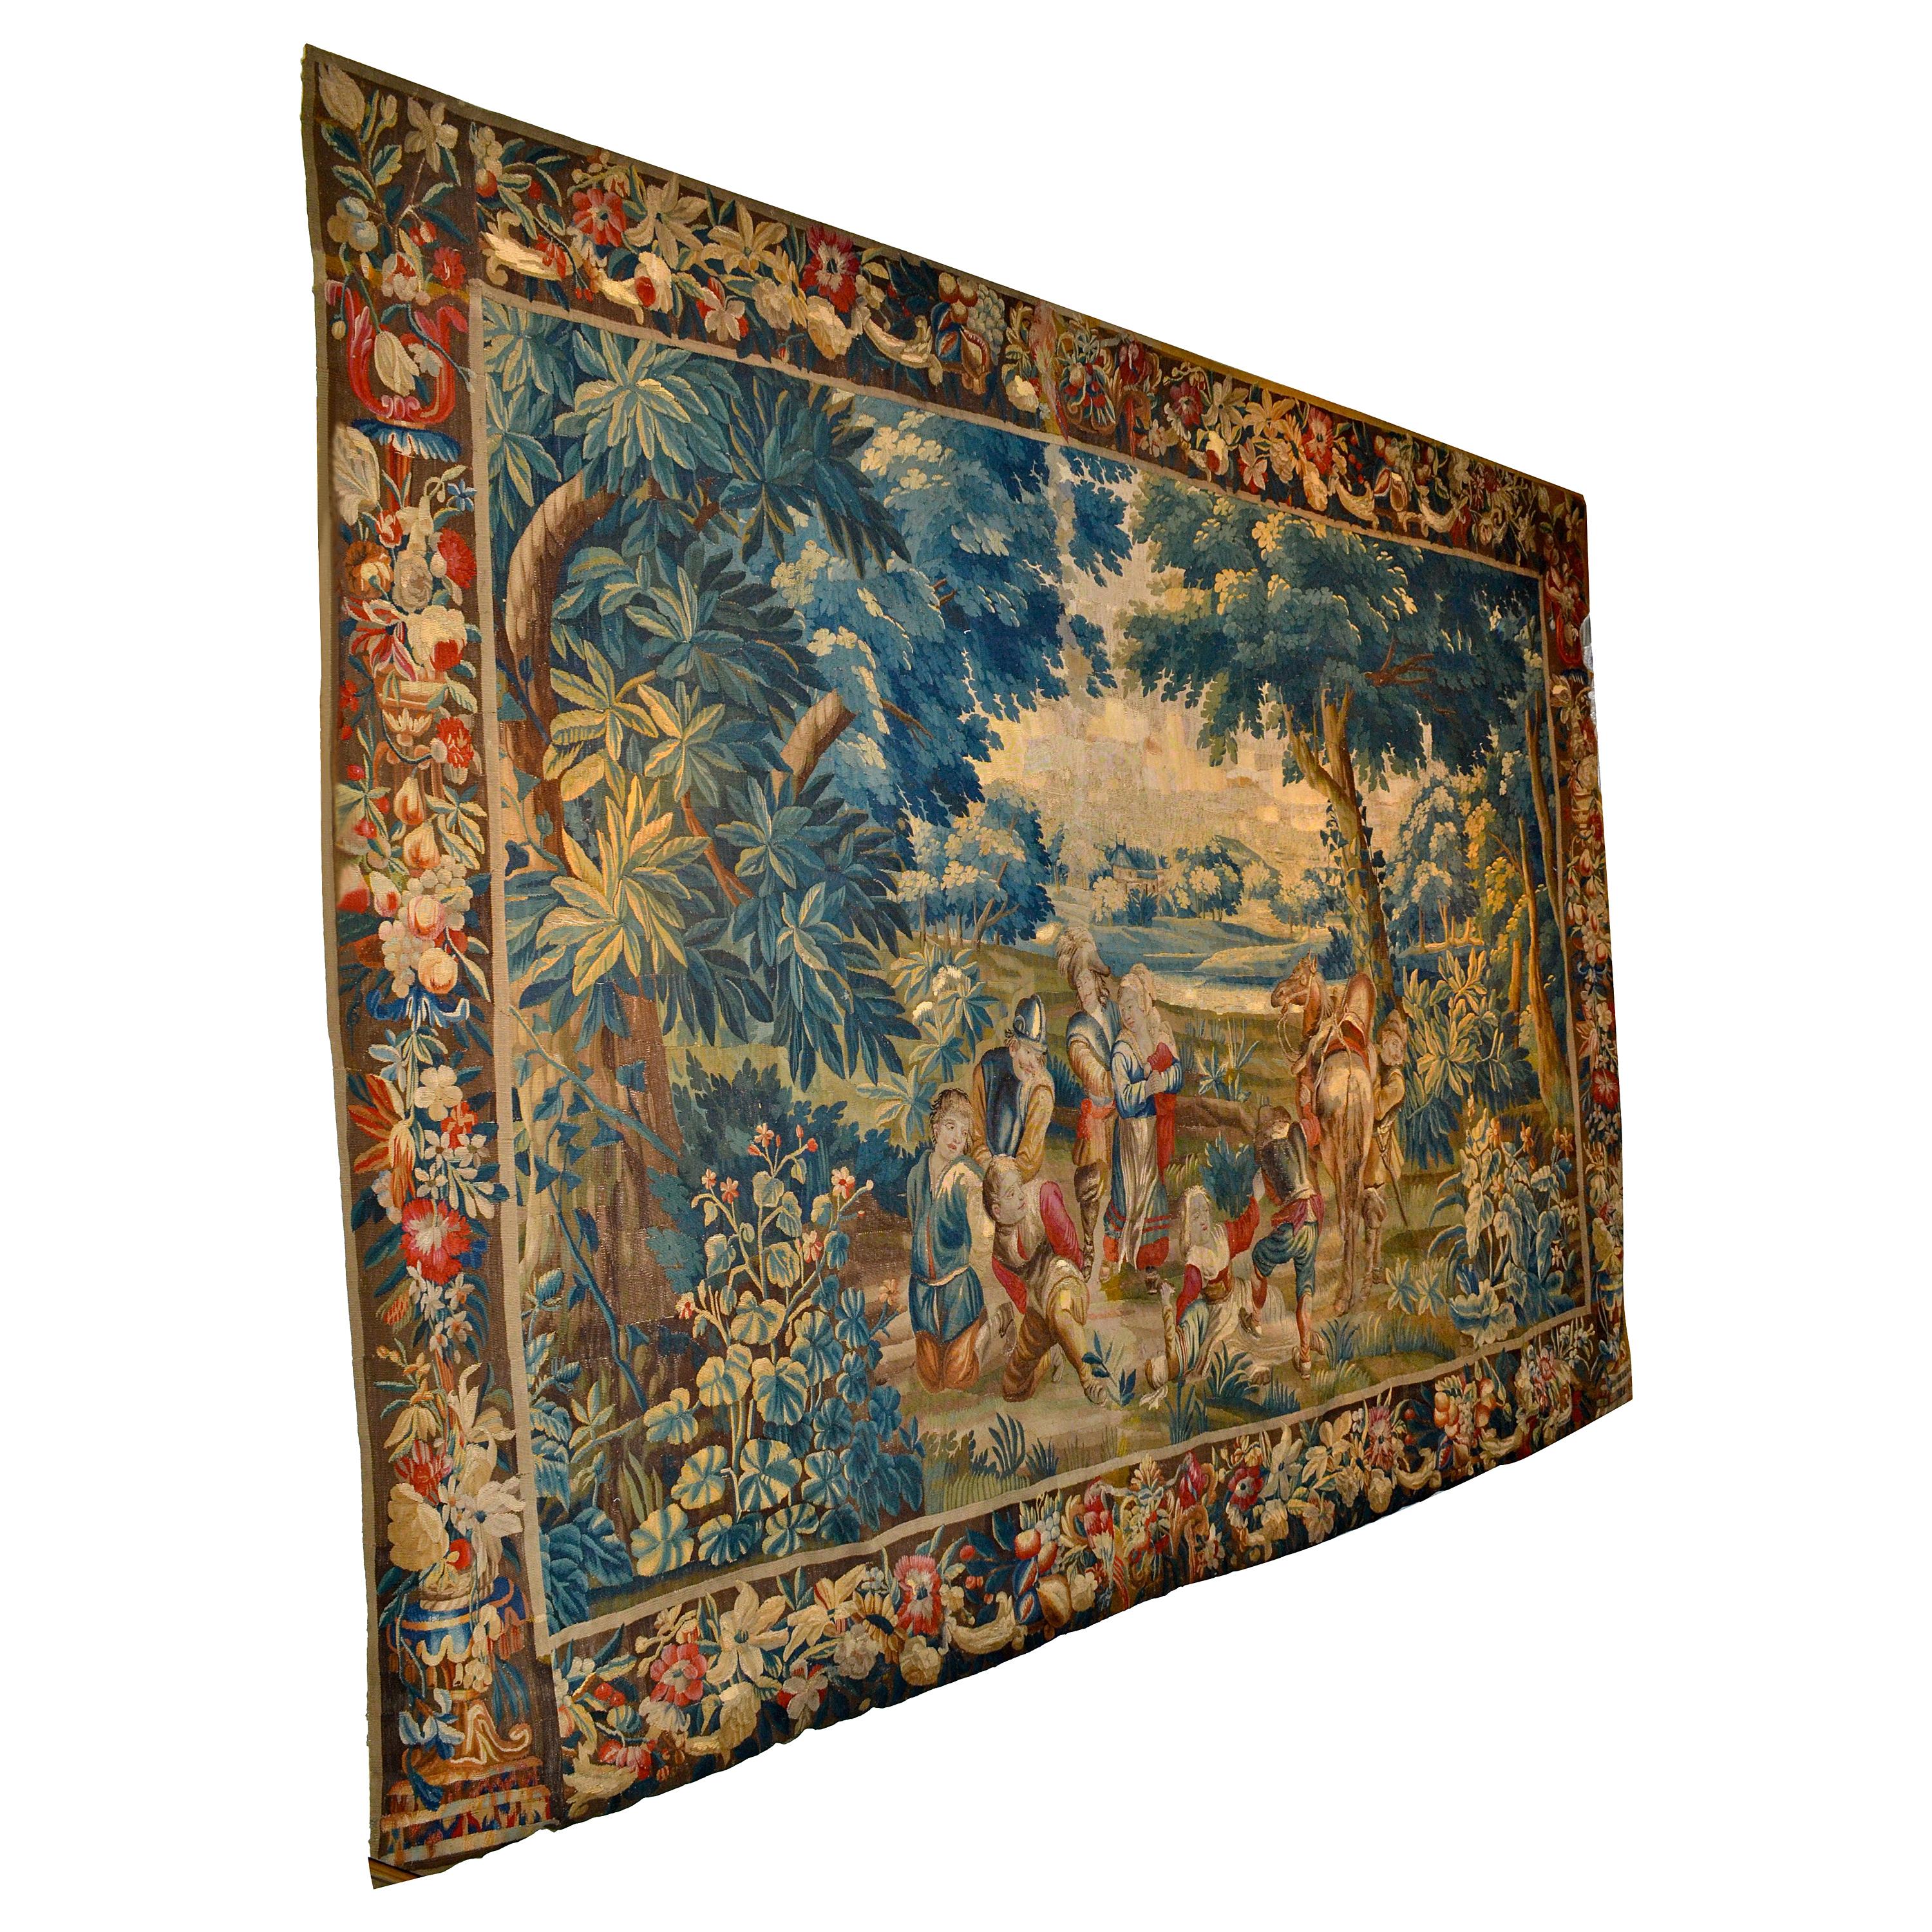 17th Century Flemish Tapestry from the Estate of Baron Munchausen